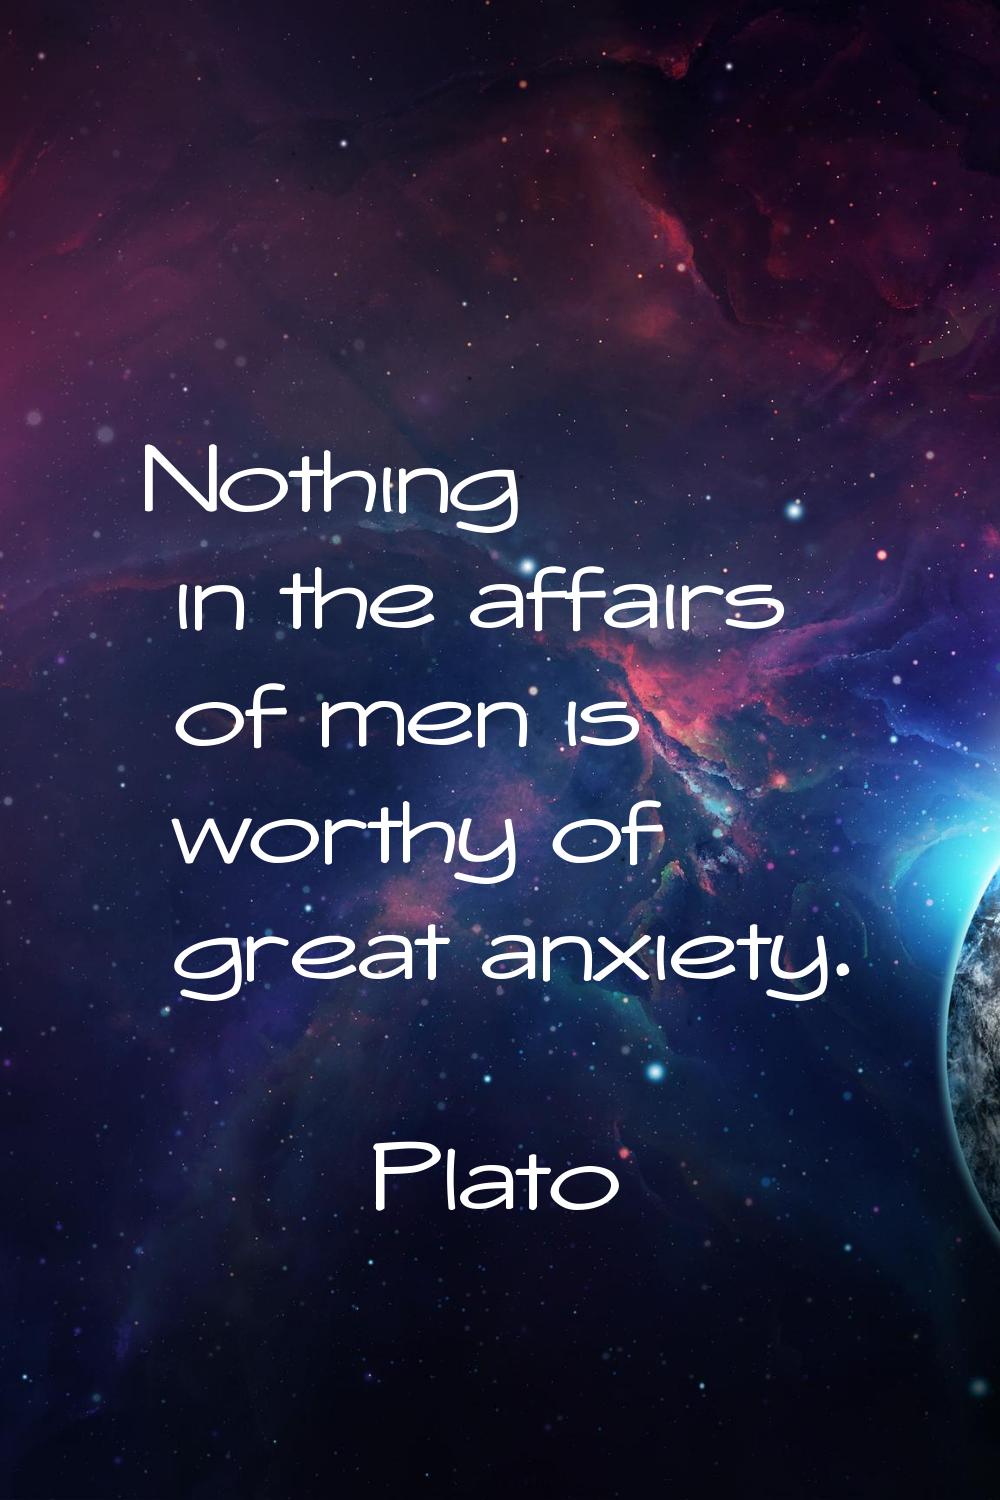 Nothing in the affairs of men is worthy of great anxiety.